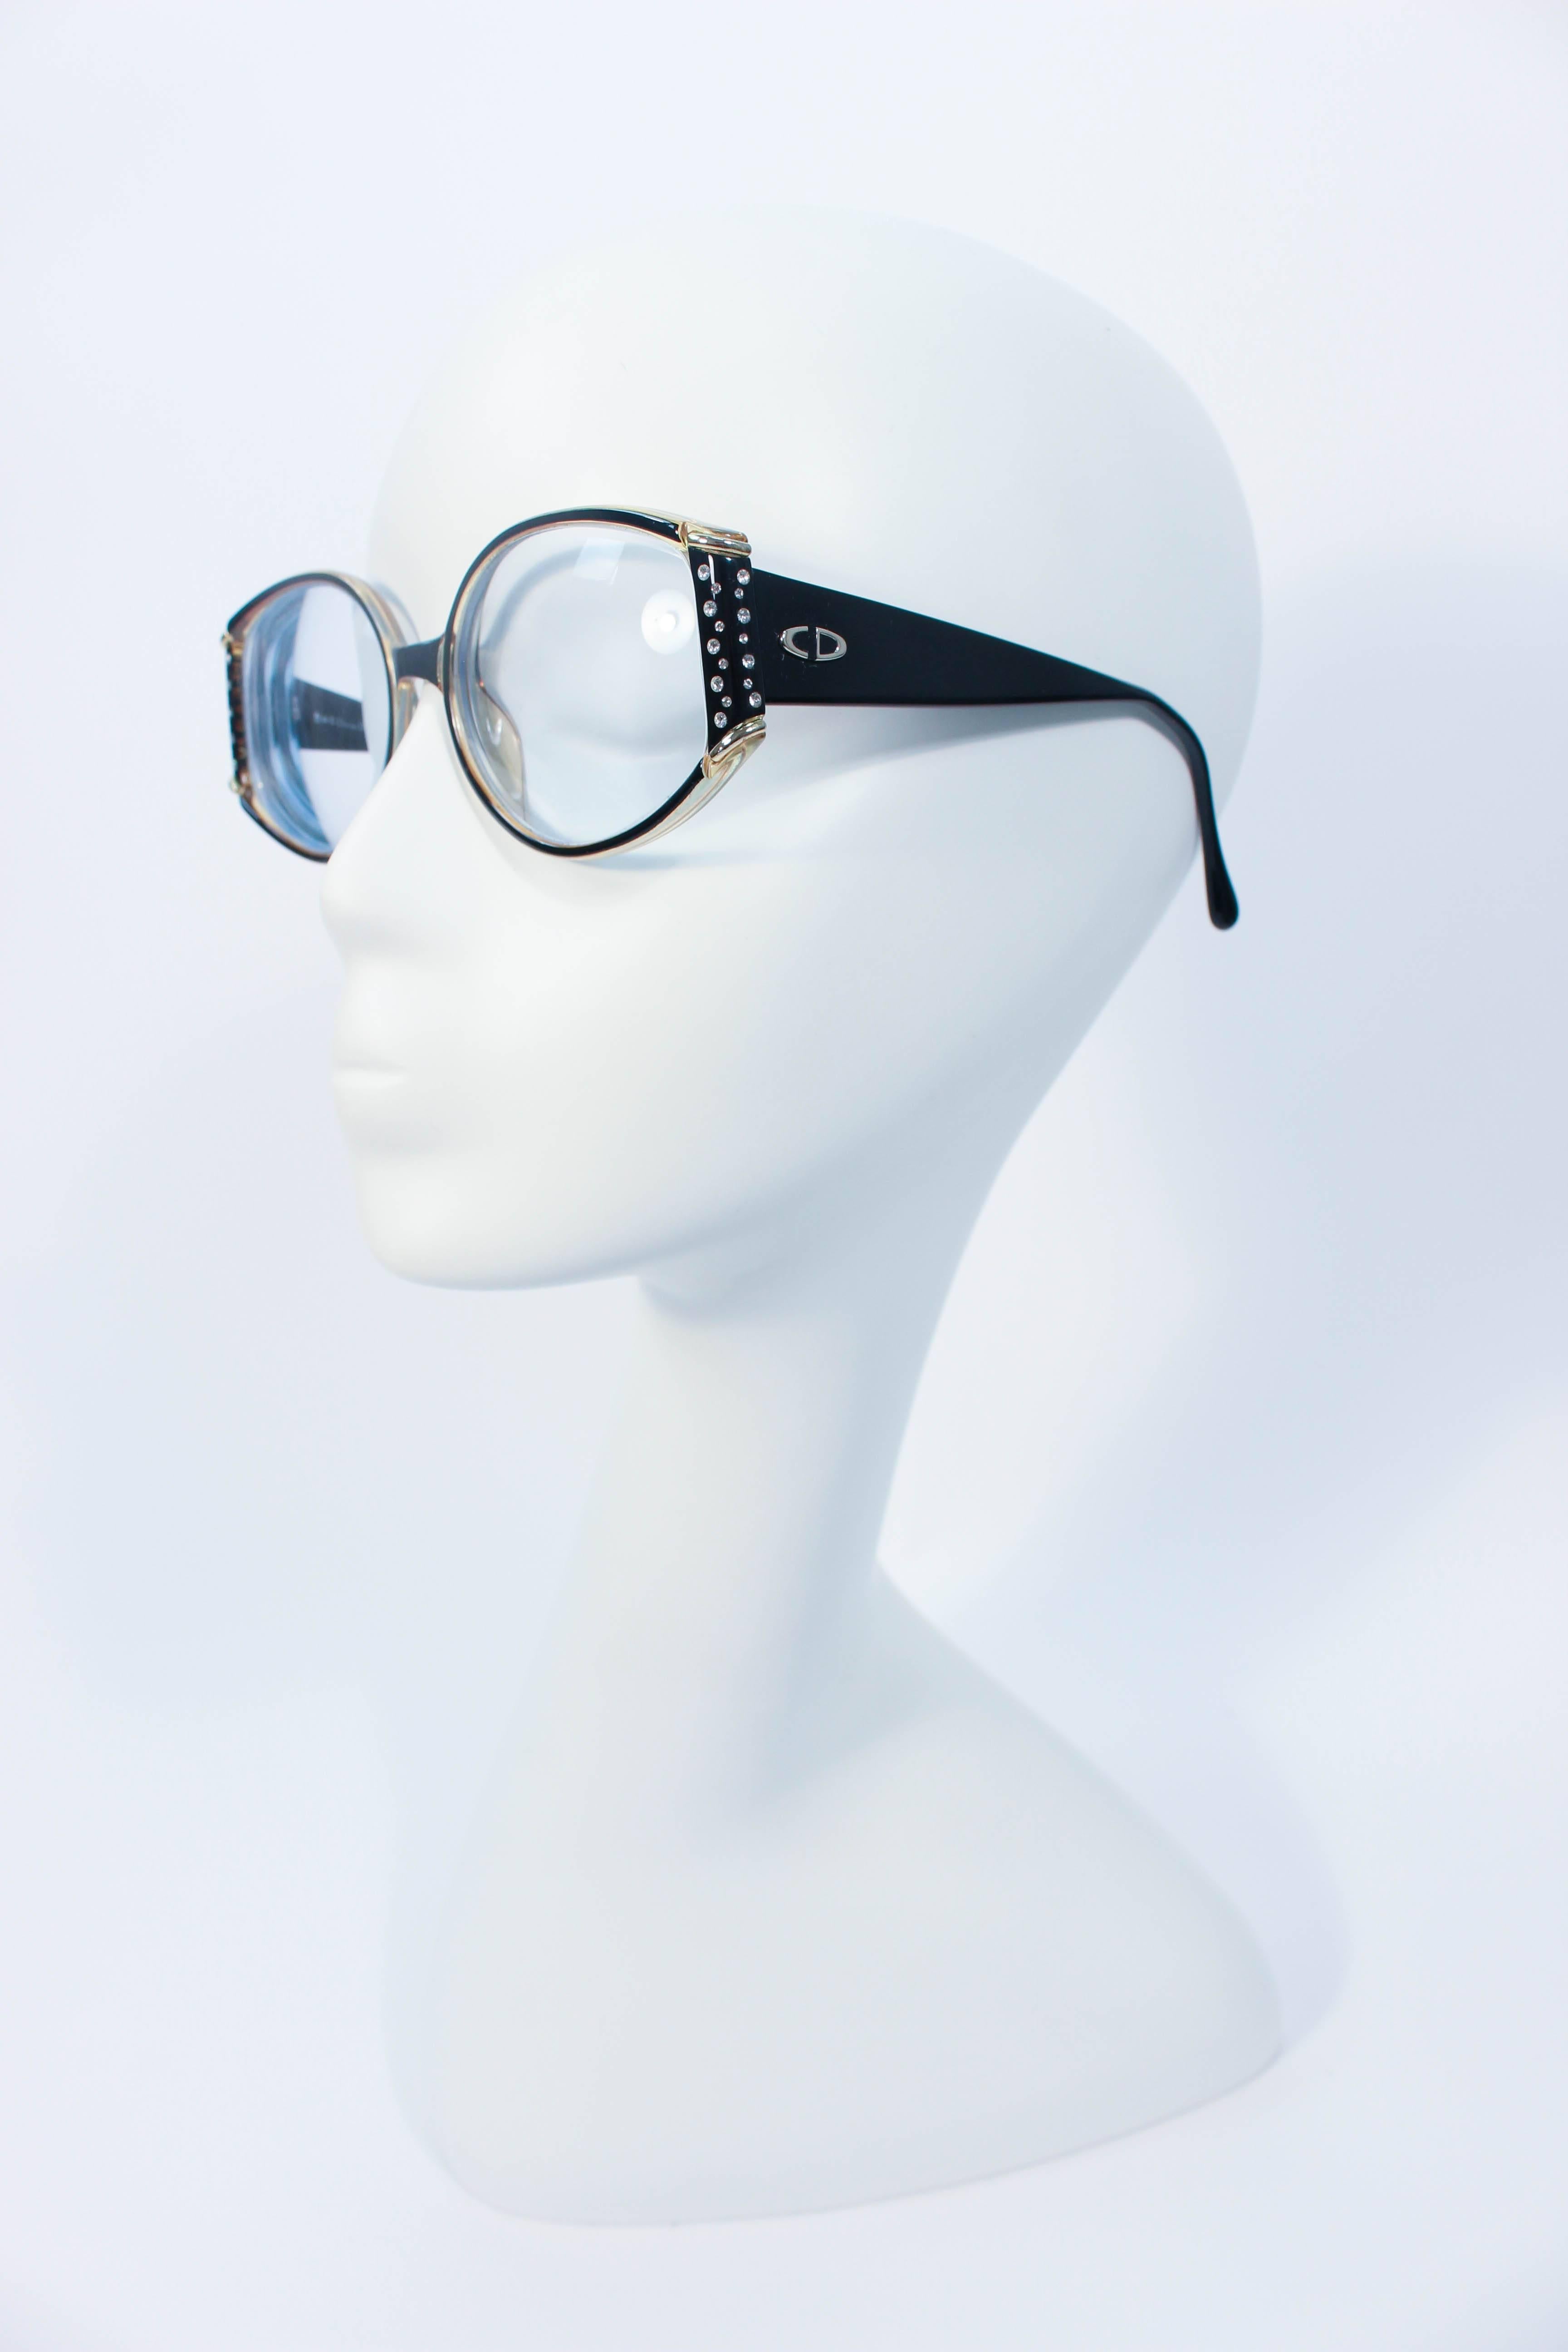 Women's CHRISTIAN DIOR Vintage Black Sunglasses with Rhinestone Details Made in Germany